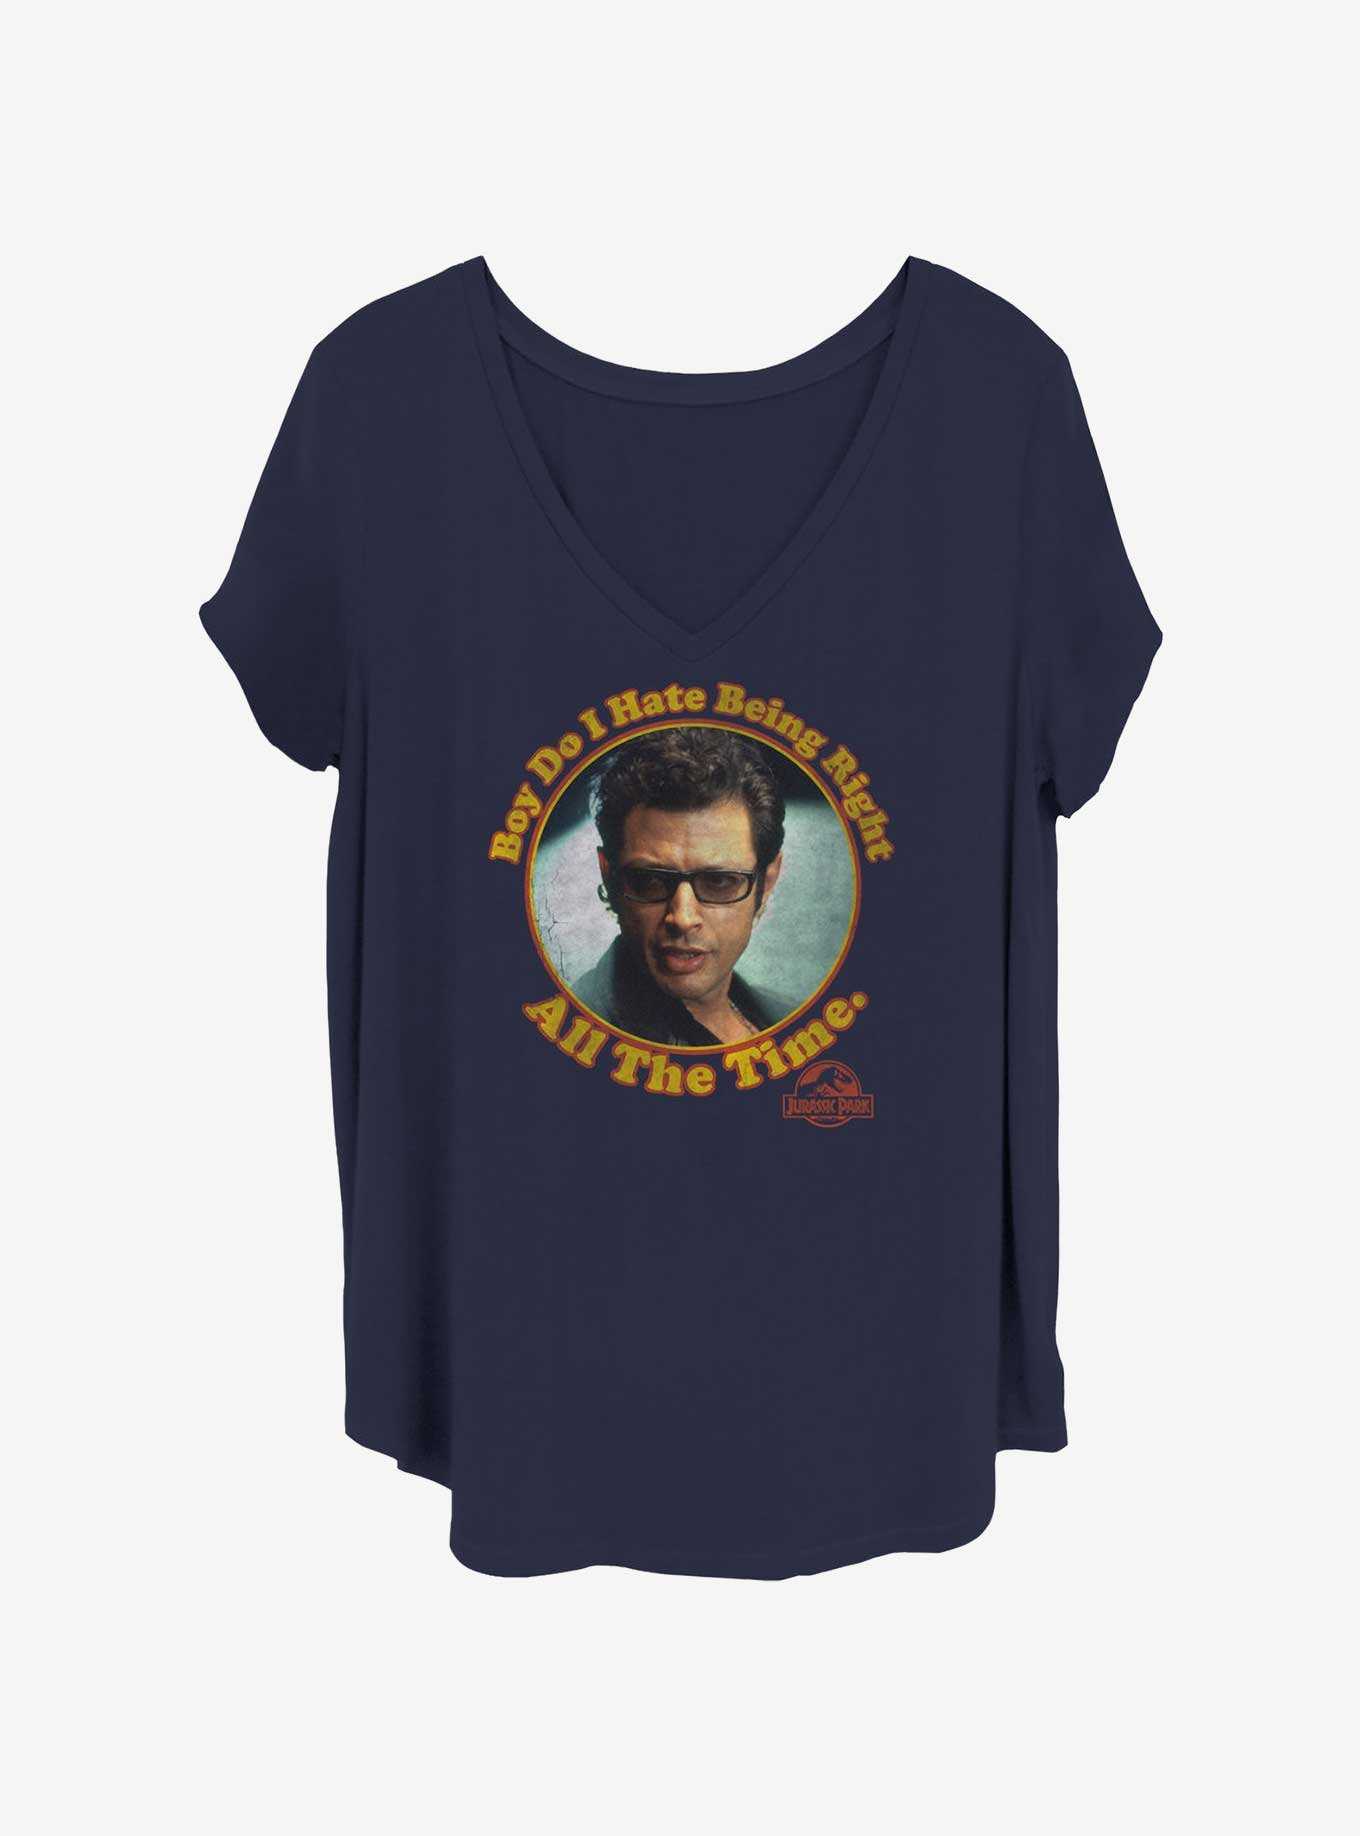 Jurassic Park Dr. Ian Malcolm Right All The Time Girls T-Shirt Plus Size, , hi-res